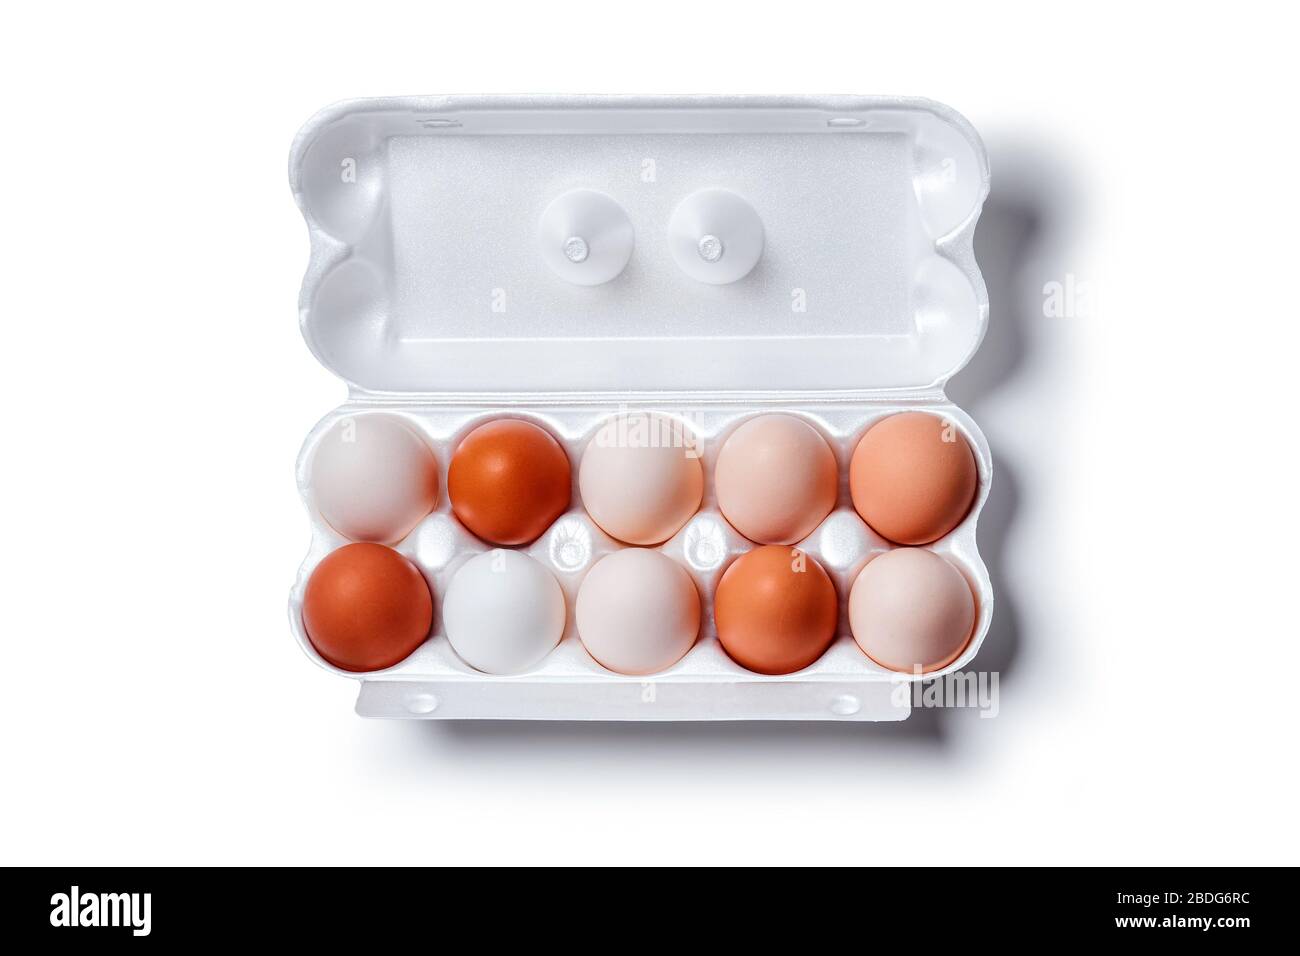 eggs of different shades from white to brown are packed together in one egg crate, isolated on a white background, horizontal top view, Stock Photo